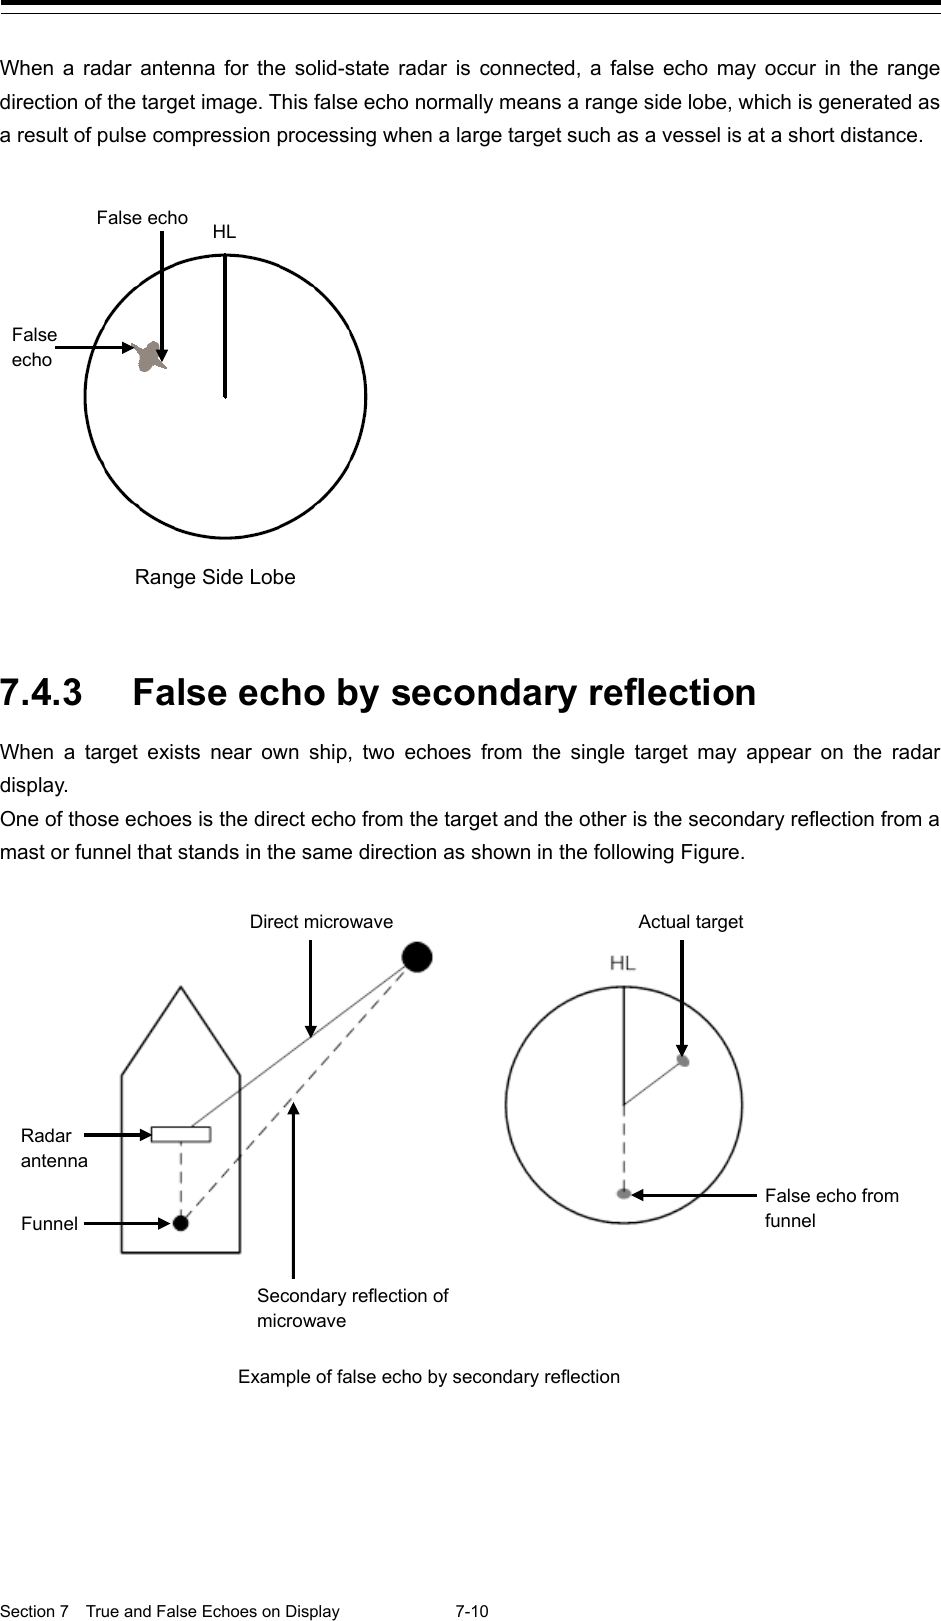  Section 7  True and False Echoes on Display  7-10  When  a radar antenna for the solid-state radar is connected,  a false echo may occur in the  range direction of the target image. This false echo normally means a range side lobe, which is generated as a result of pulse compression processing when a large target such as a vessel is at a short distance.    7.4.3 False echo by secondary reflection When a target exists near own ship, two echoes from the single target may appear on the radar display. One of those echoes is the direct echo from the target and the other is the secondary reflection from a mast or funnel that stands in the same direction as shown in the following Figure.      Range Side Lobe  HL False echo False echo Example of false echo by secondary reflection  Direct microwave Radar antenna Funnel Secondary reflection of microwave Actual target False echo from funnel 